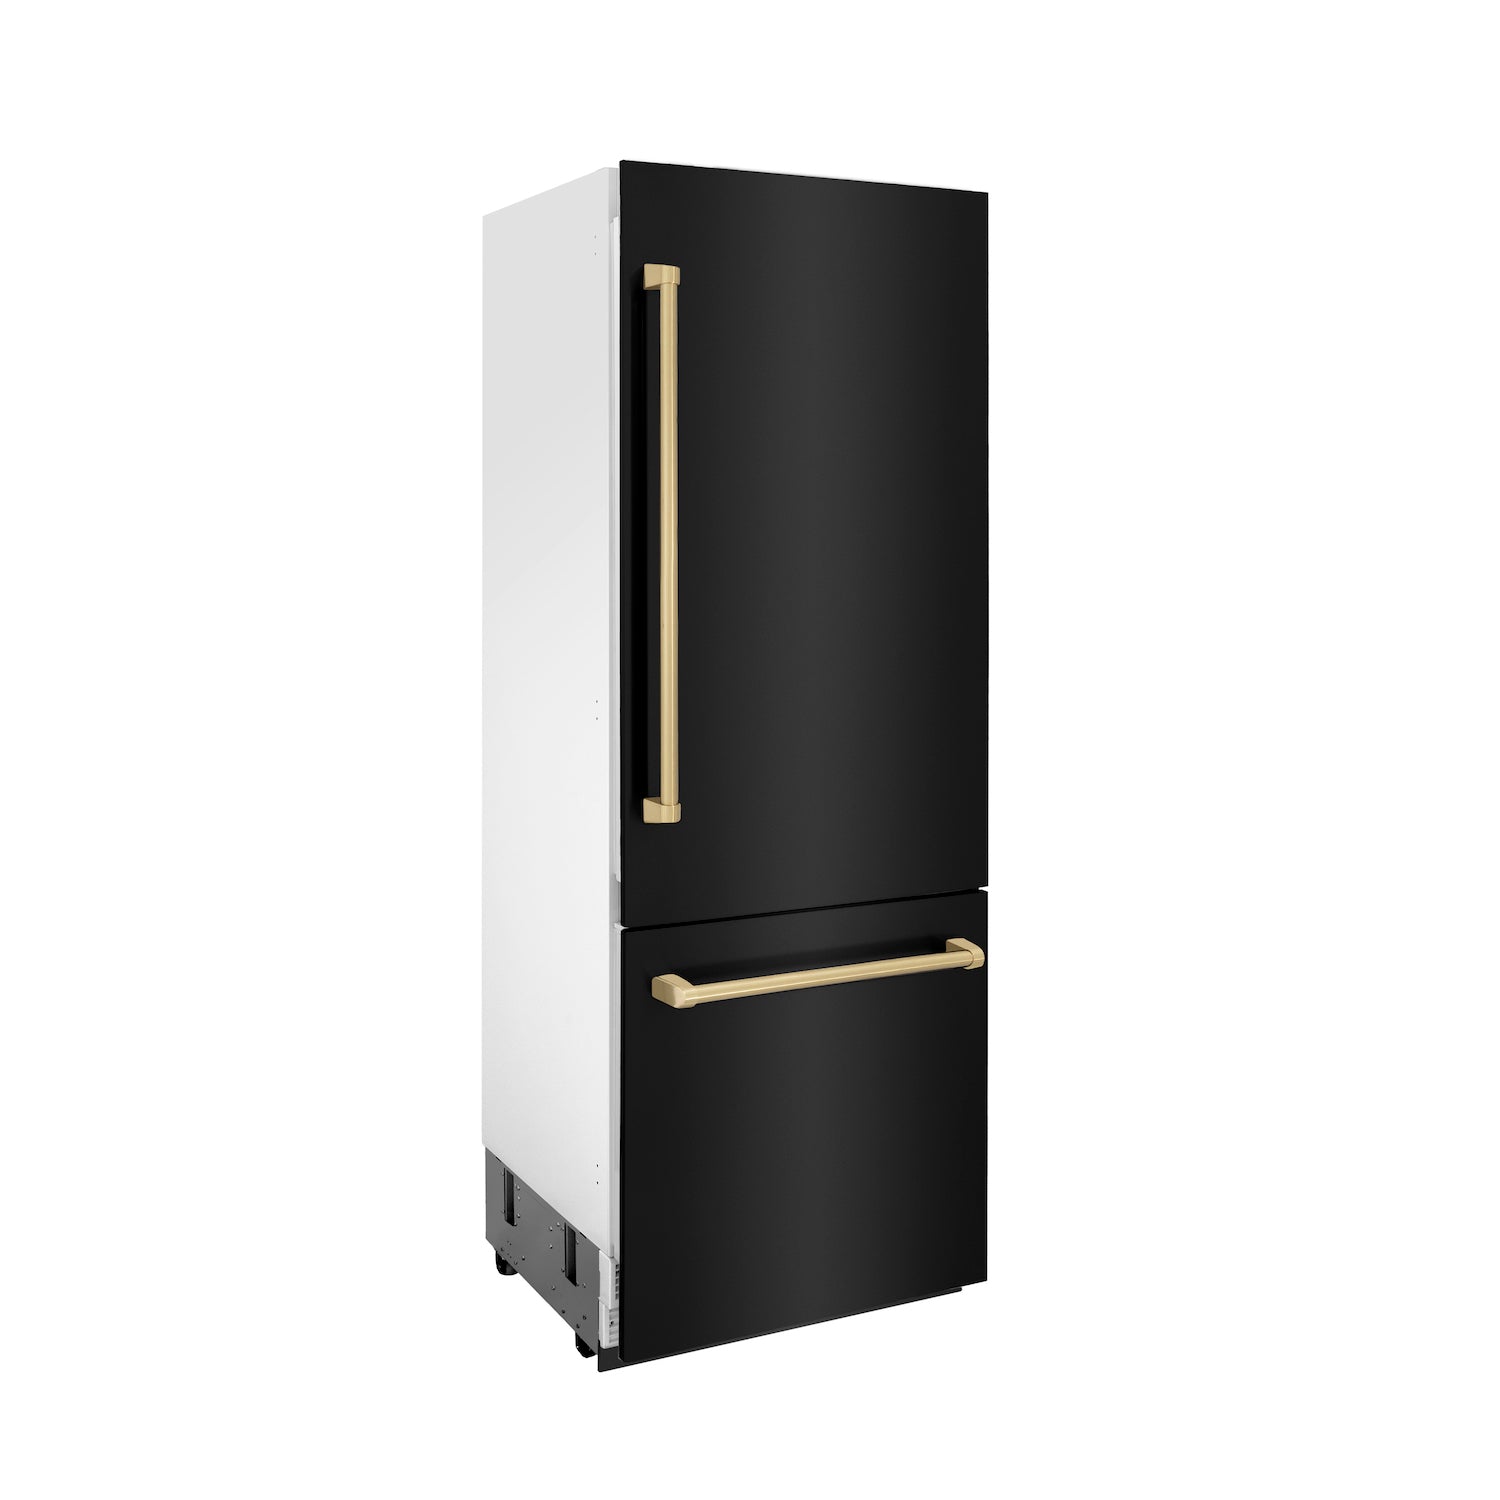 ZLINE 30" Autograph Edition Built-in Refrigerator in Black Stainless Steel with Champagne Bronze Accents side.